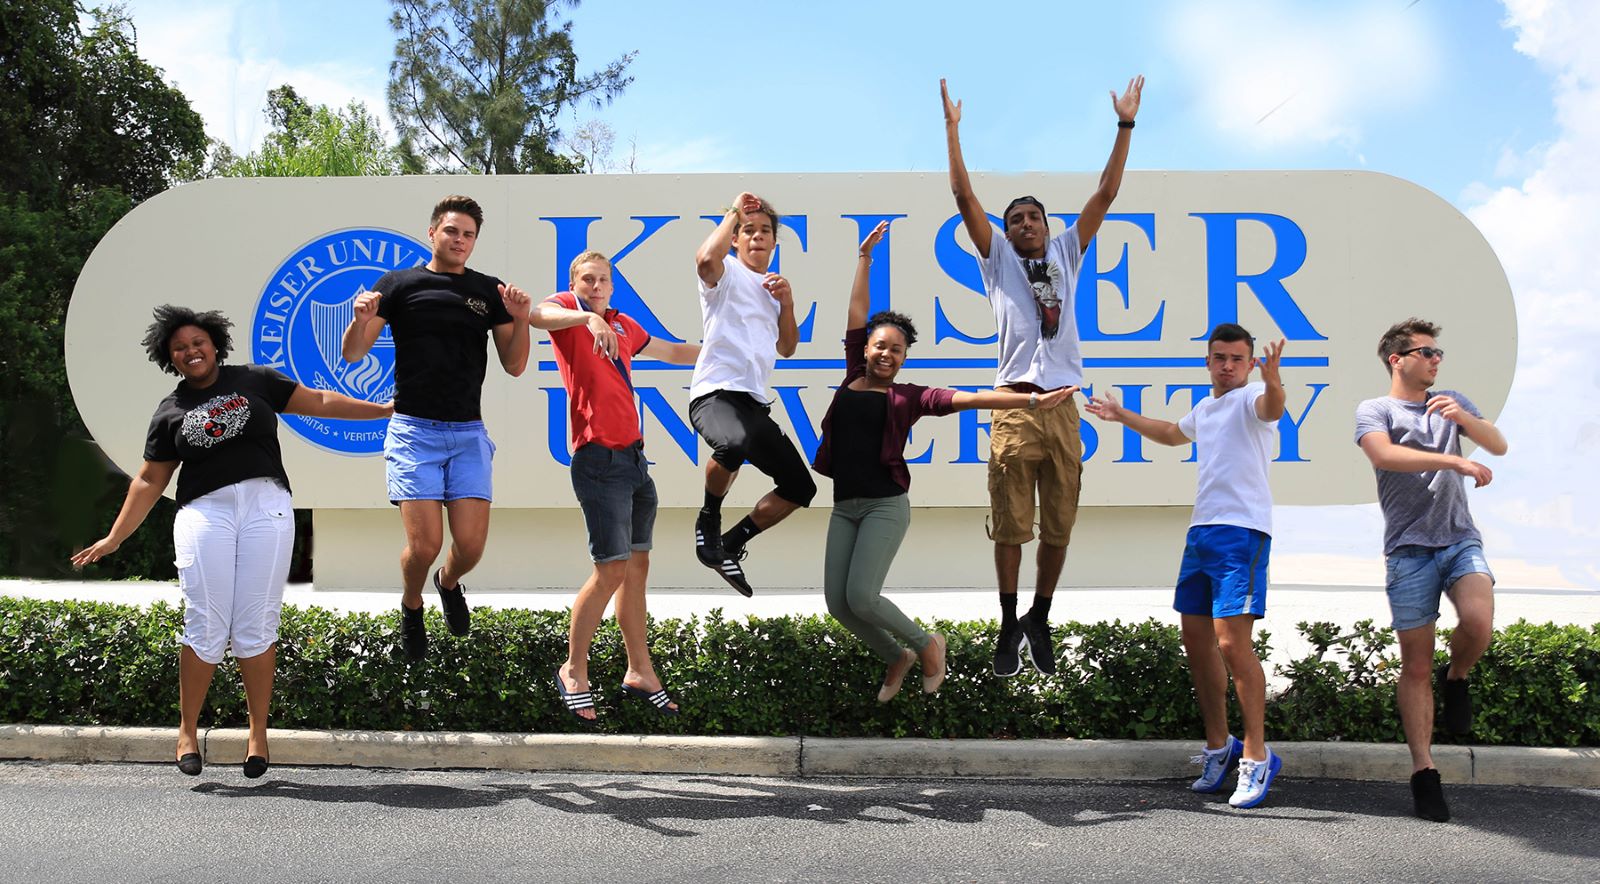 Keiser Students jumping in front of Keiser University sign